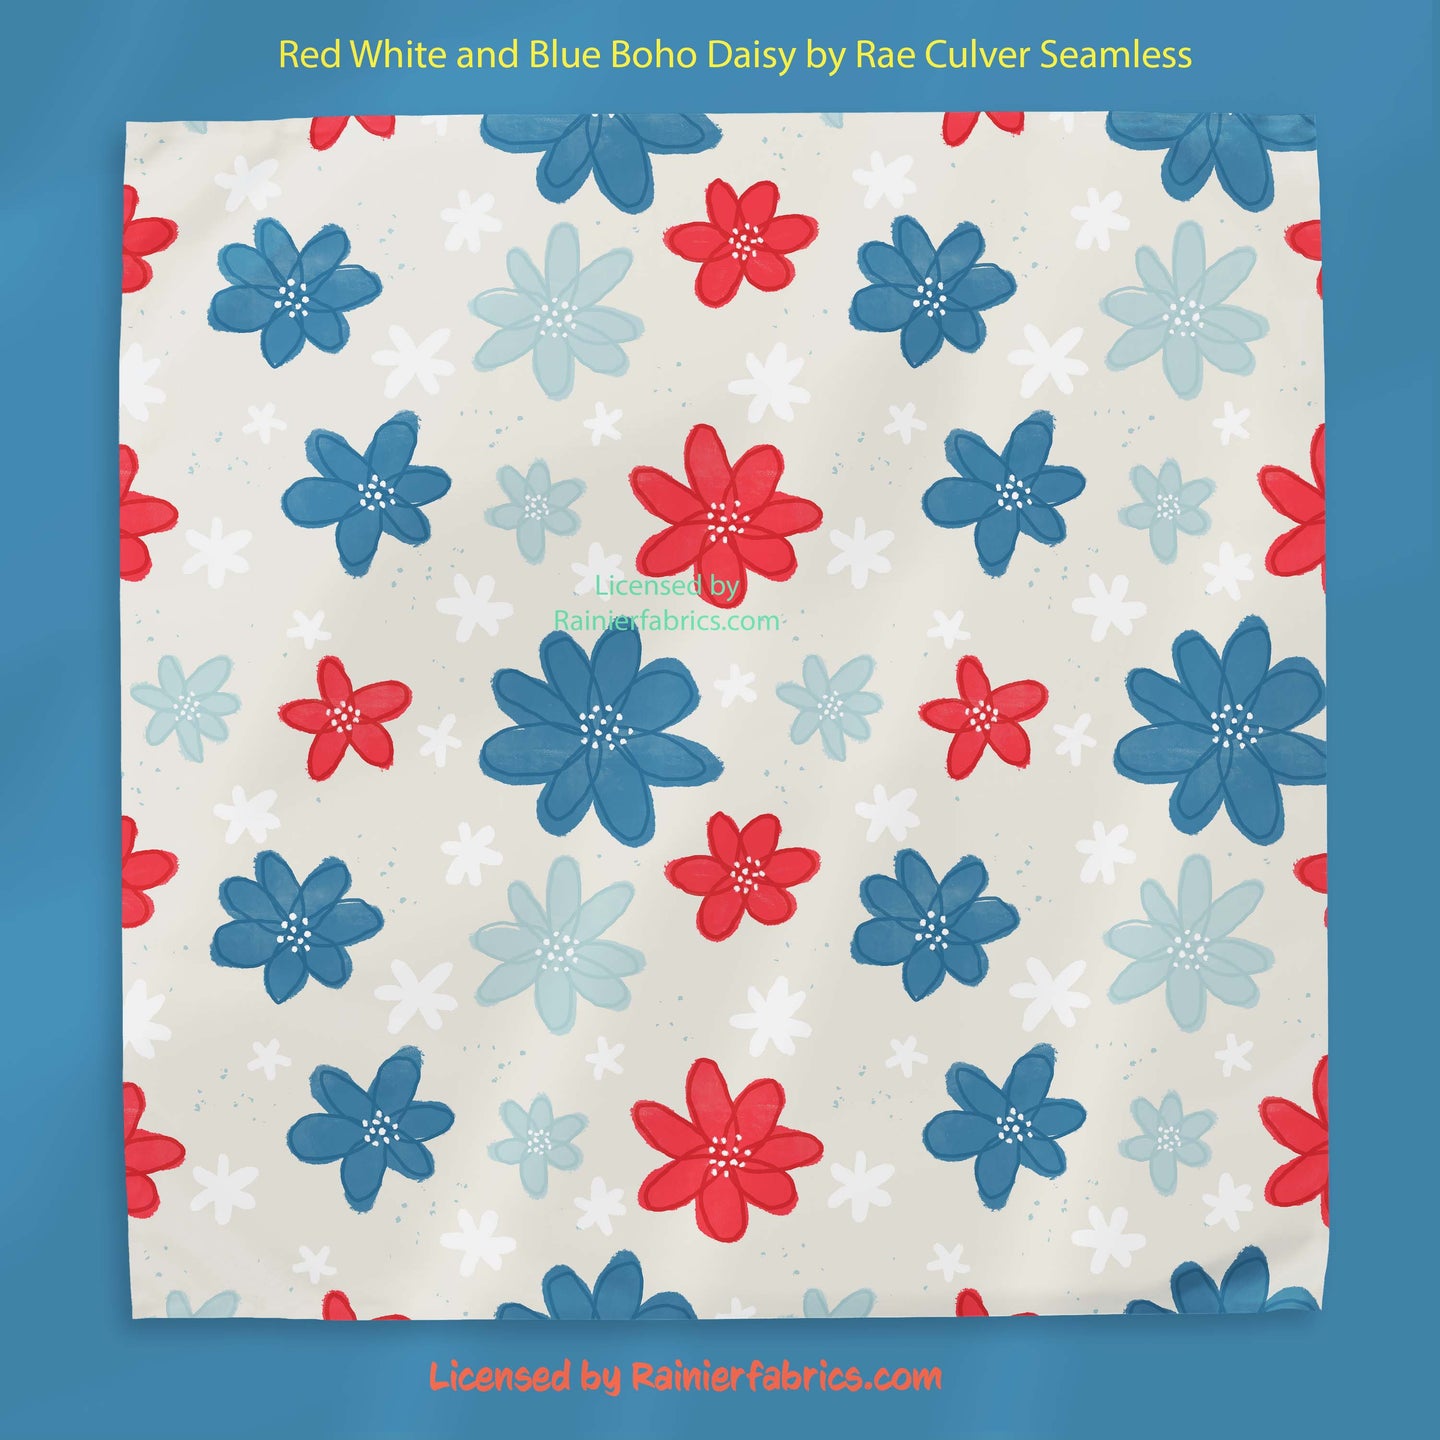 Red White and Blue Boho Daisies and Plaid by Rae Culver Seamless - 2-5 business days to ship - Order by 1/2 yard